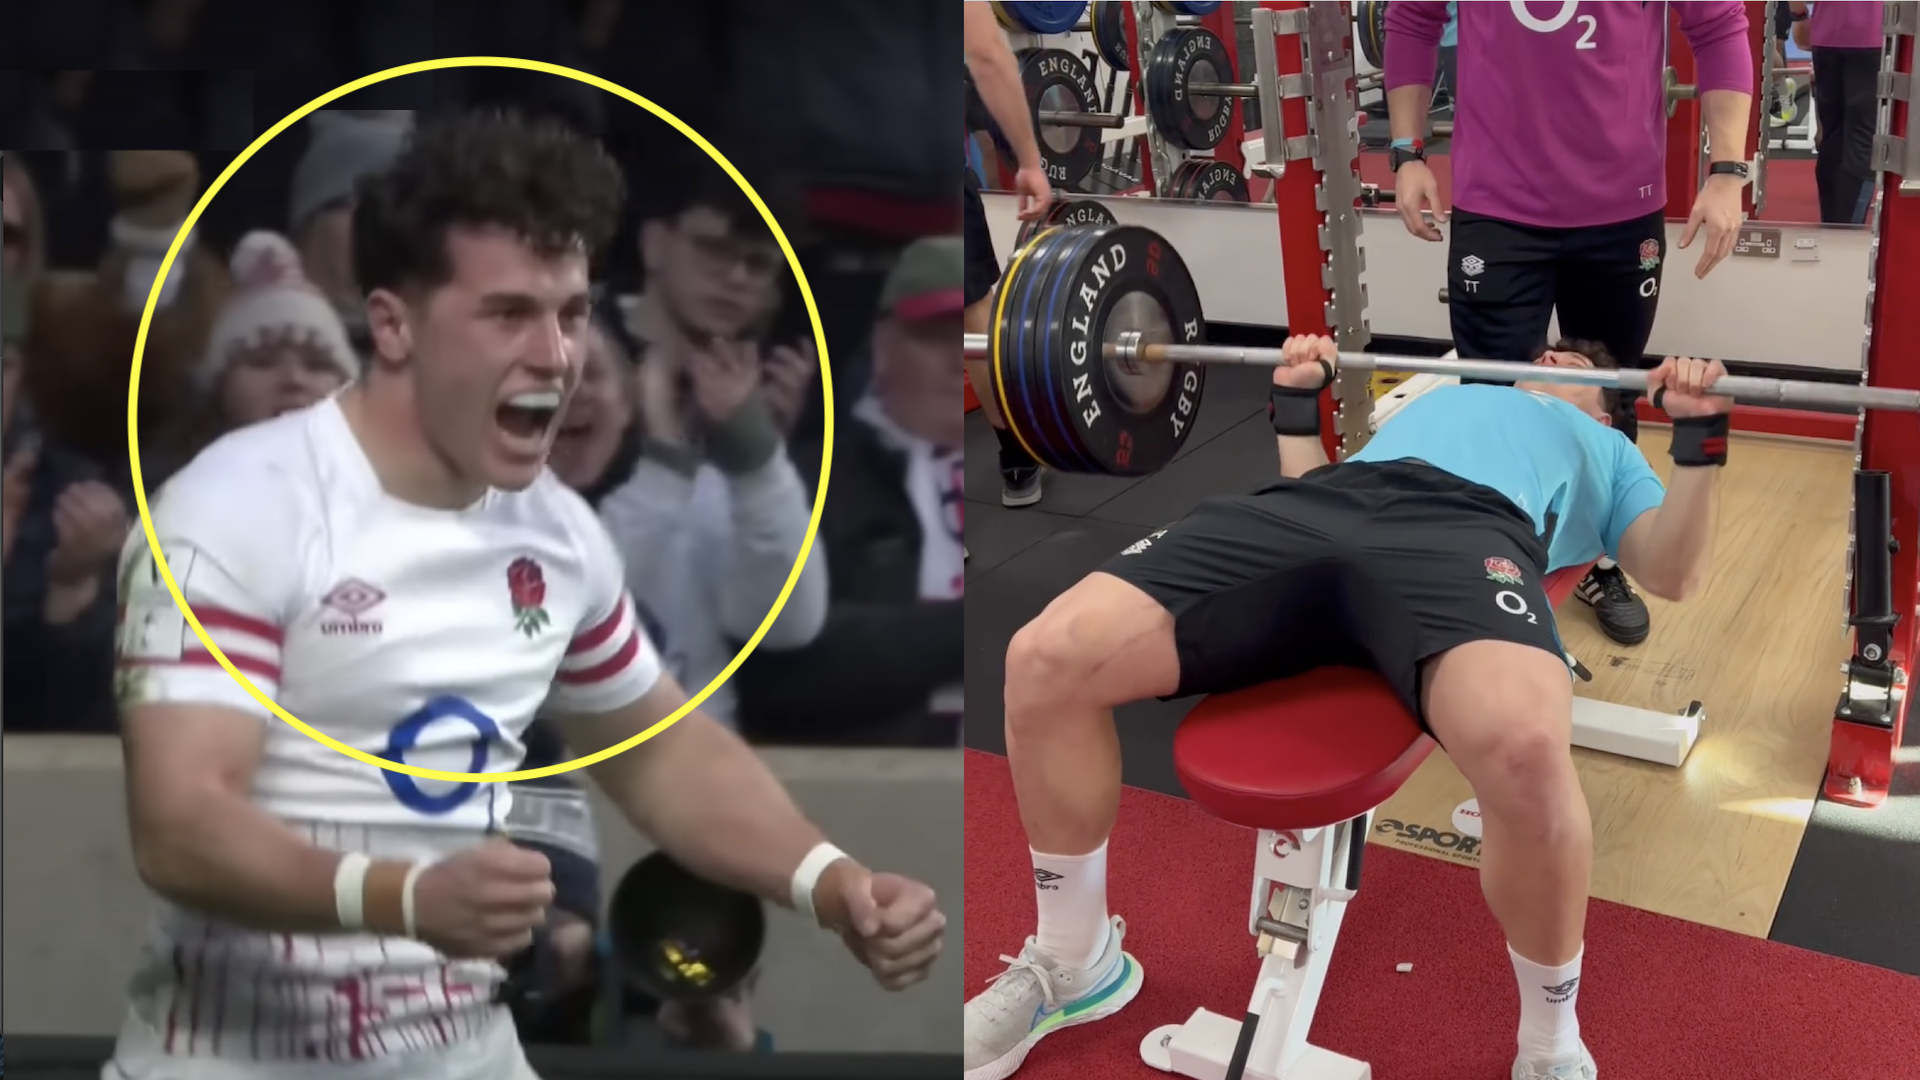 Henry Arundell officially a freak of nature with massive bench press